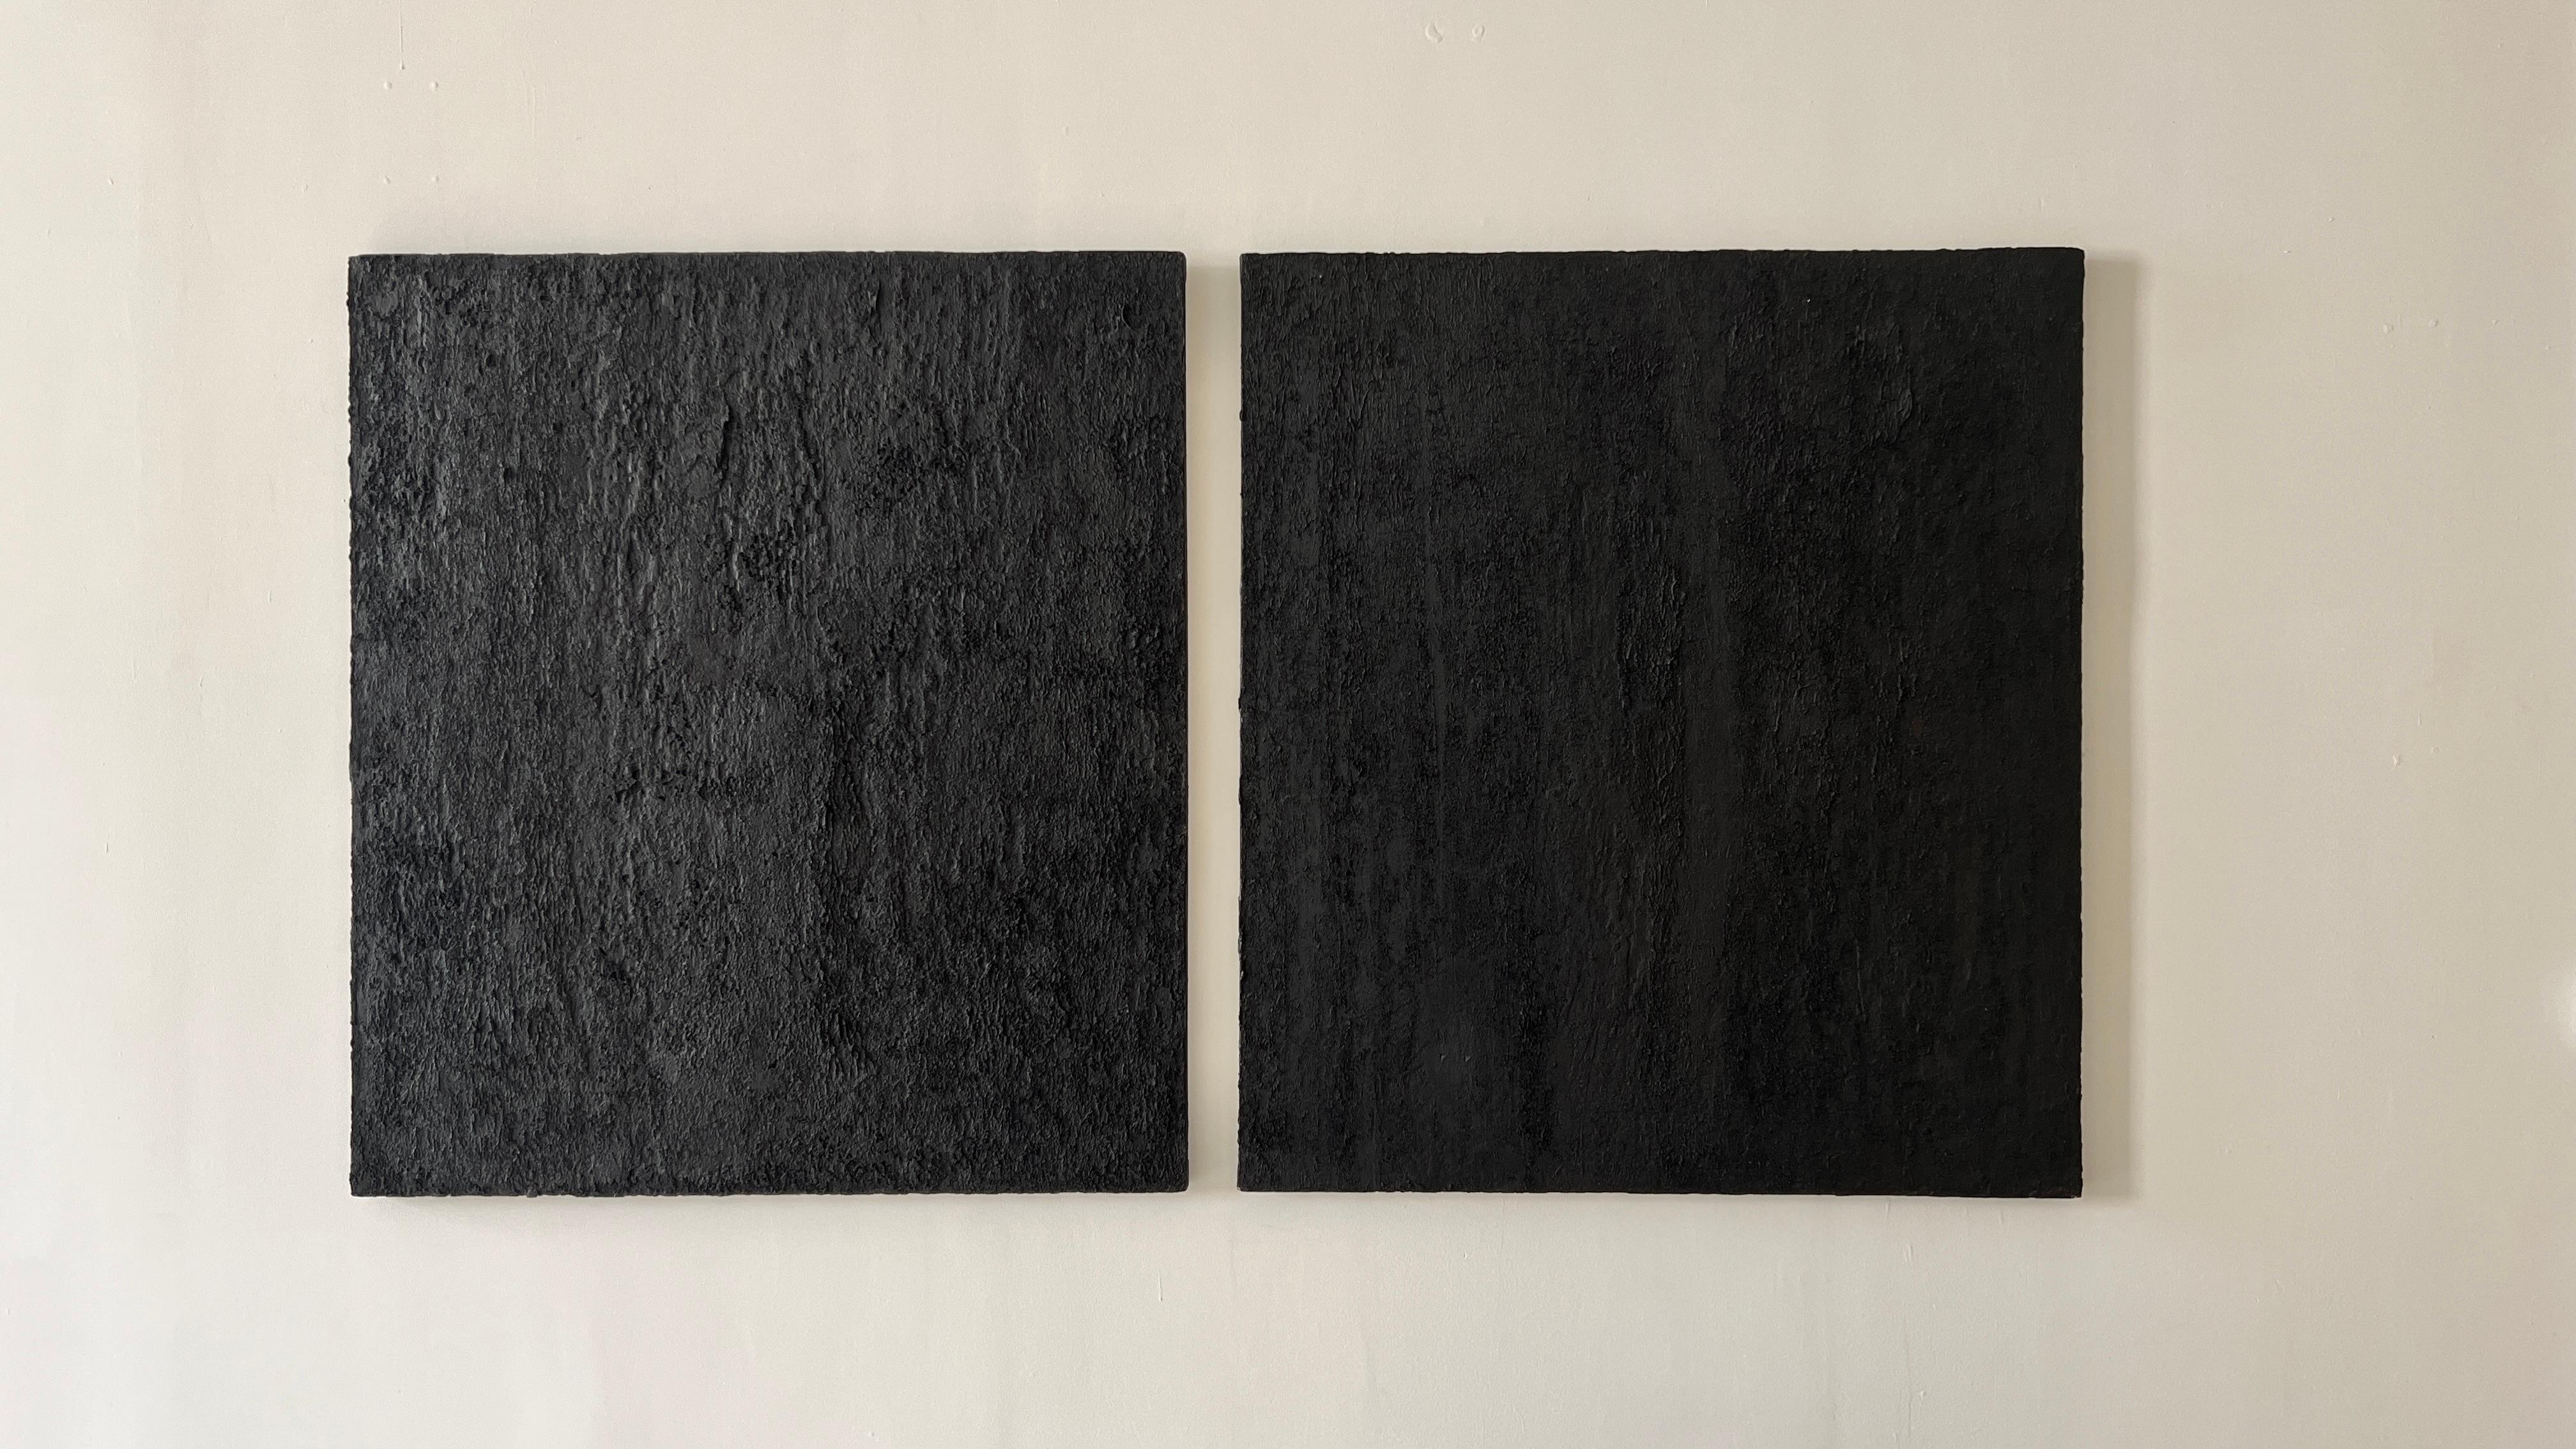 The diptych painting Untitiled: (No Trace - 2009 -2010 ) is an artwork inspired and created during the Big Sur basin fire in 2009.
The image of burned patterns of ancient redwood trees consumed by fire...
The title refers to the Zen Mind – No